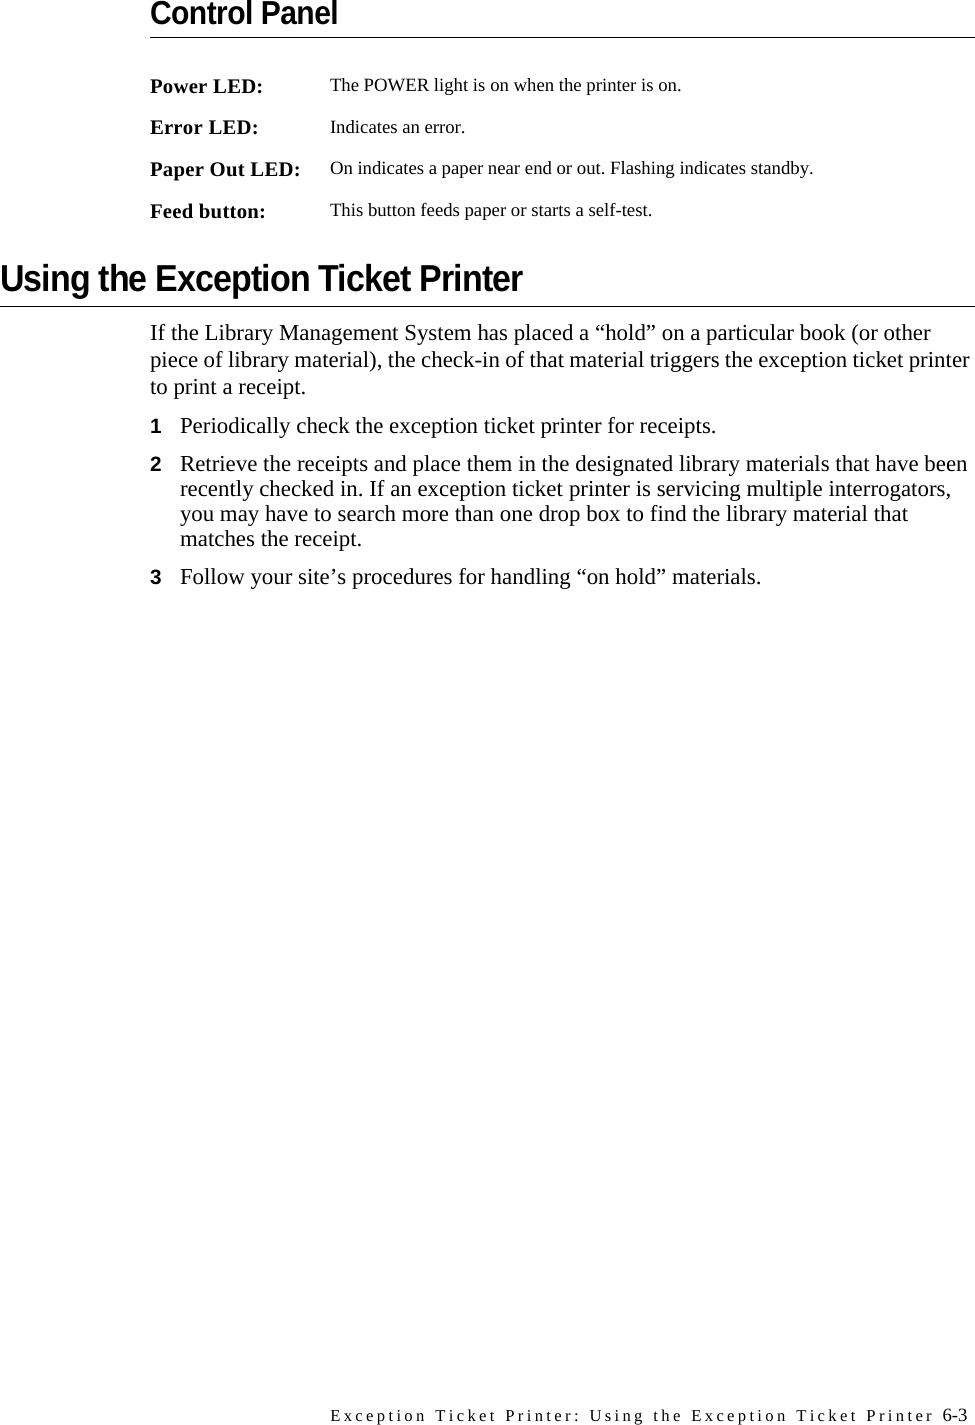 Exception Ticket Printer: Using the Exception Ticket Printer 6-3Control PanelUsing the Exception Ticket PrinterIf the Library Management System has placed a “hold” on a particular book (or other piece of library material), the check-in of that material triggers the exception ticket printer to print a receipt. 1Periodically check the exception ticket printer for receipts. 2Retrieve the receipts and place them in the designated library materials that have been recently checked in. If an exception ticket printer is servicing multiple interrogators, you may have to search more than one drop box to find the library material that matches the receipt. 3Follow your site’s procedures for handling “on hold” materials. Power LED: The POWER light is on when the printer is on.Error LED: Indicates an error. Paper Out LED: On indicates a paper near end or out. Flashing indicates standby.Feed button: This button feeds paper or starts a self-test.